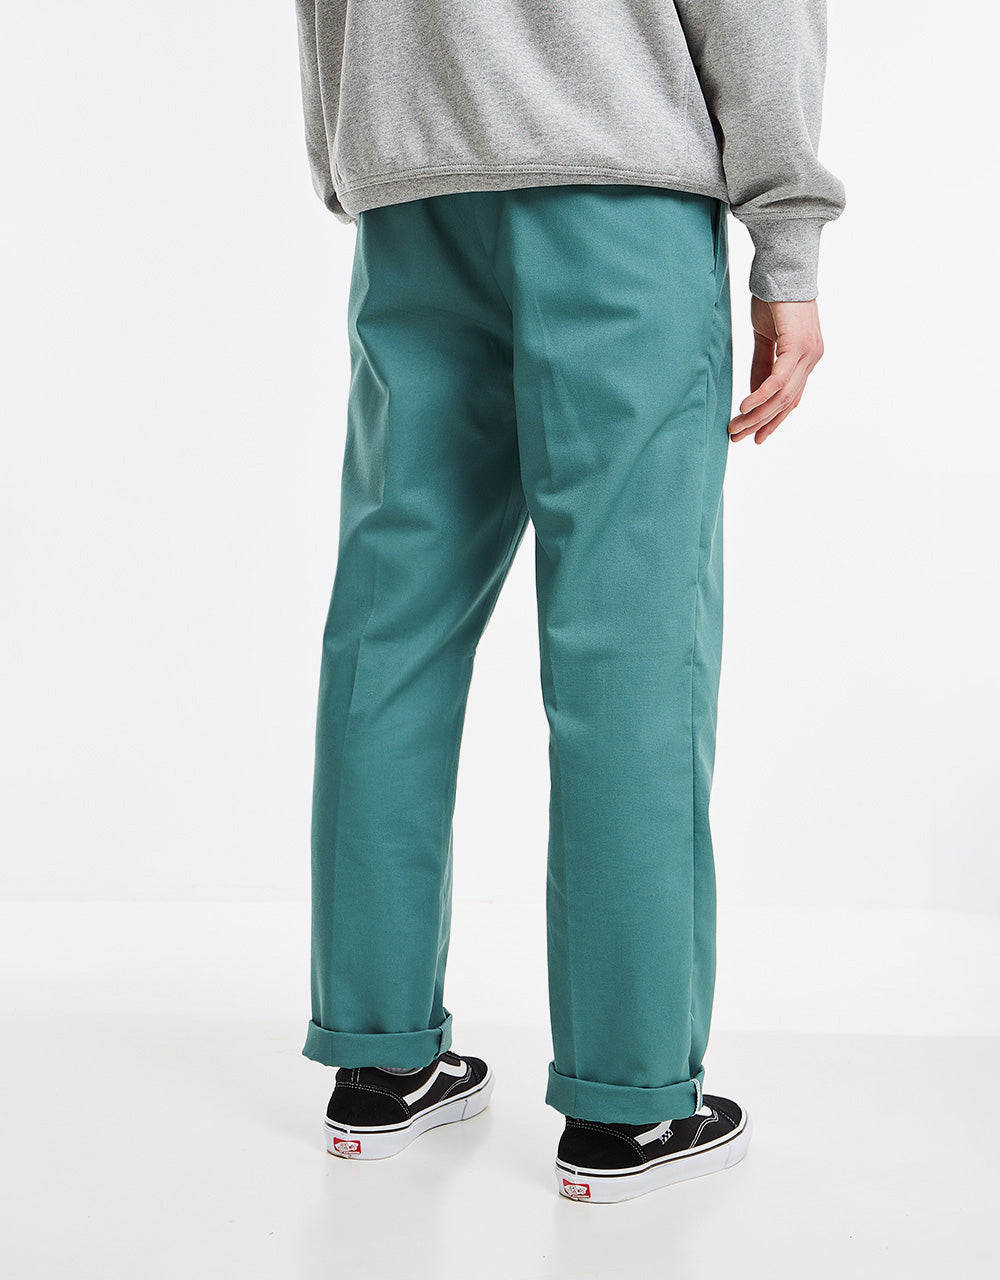 Dickies 874 Flex Work Pant - Lincoln Green – Route One